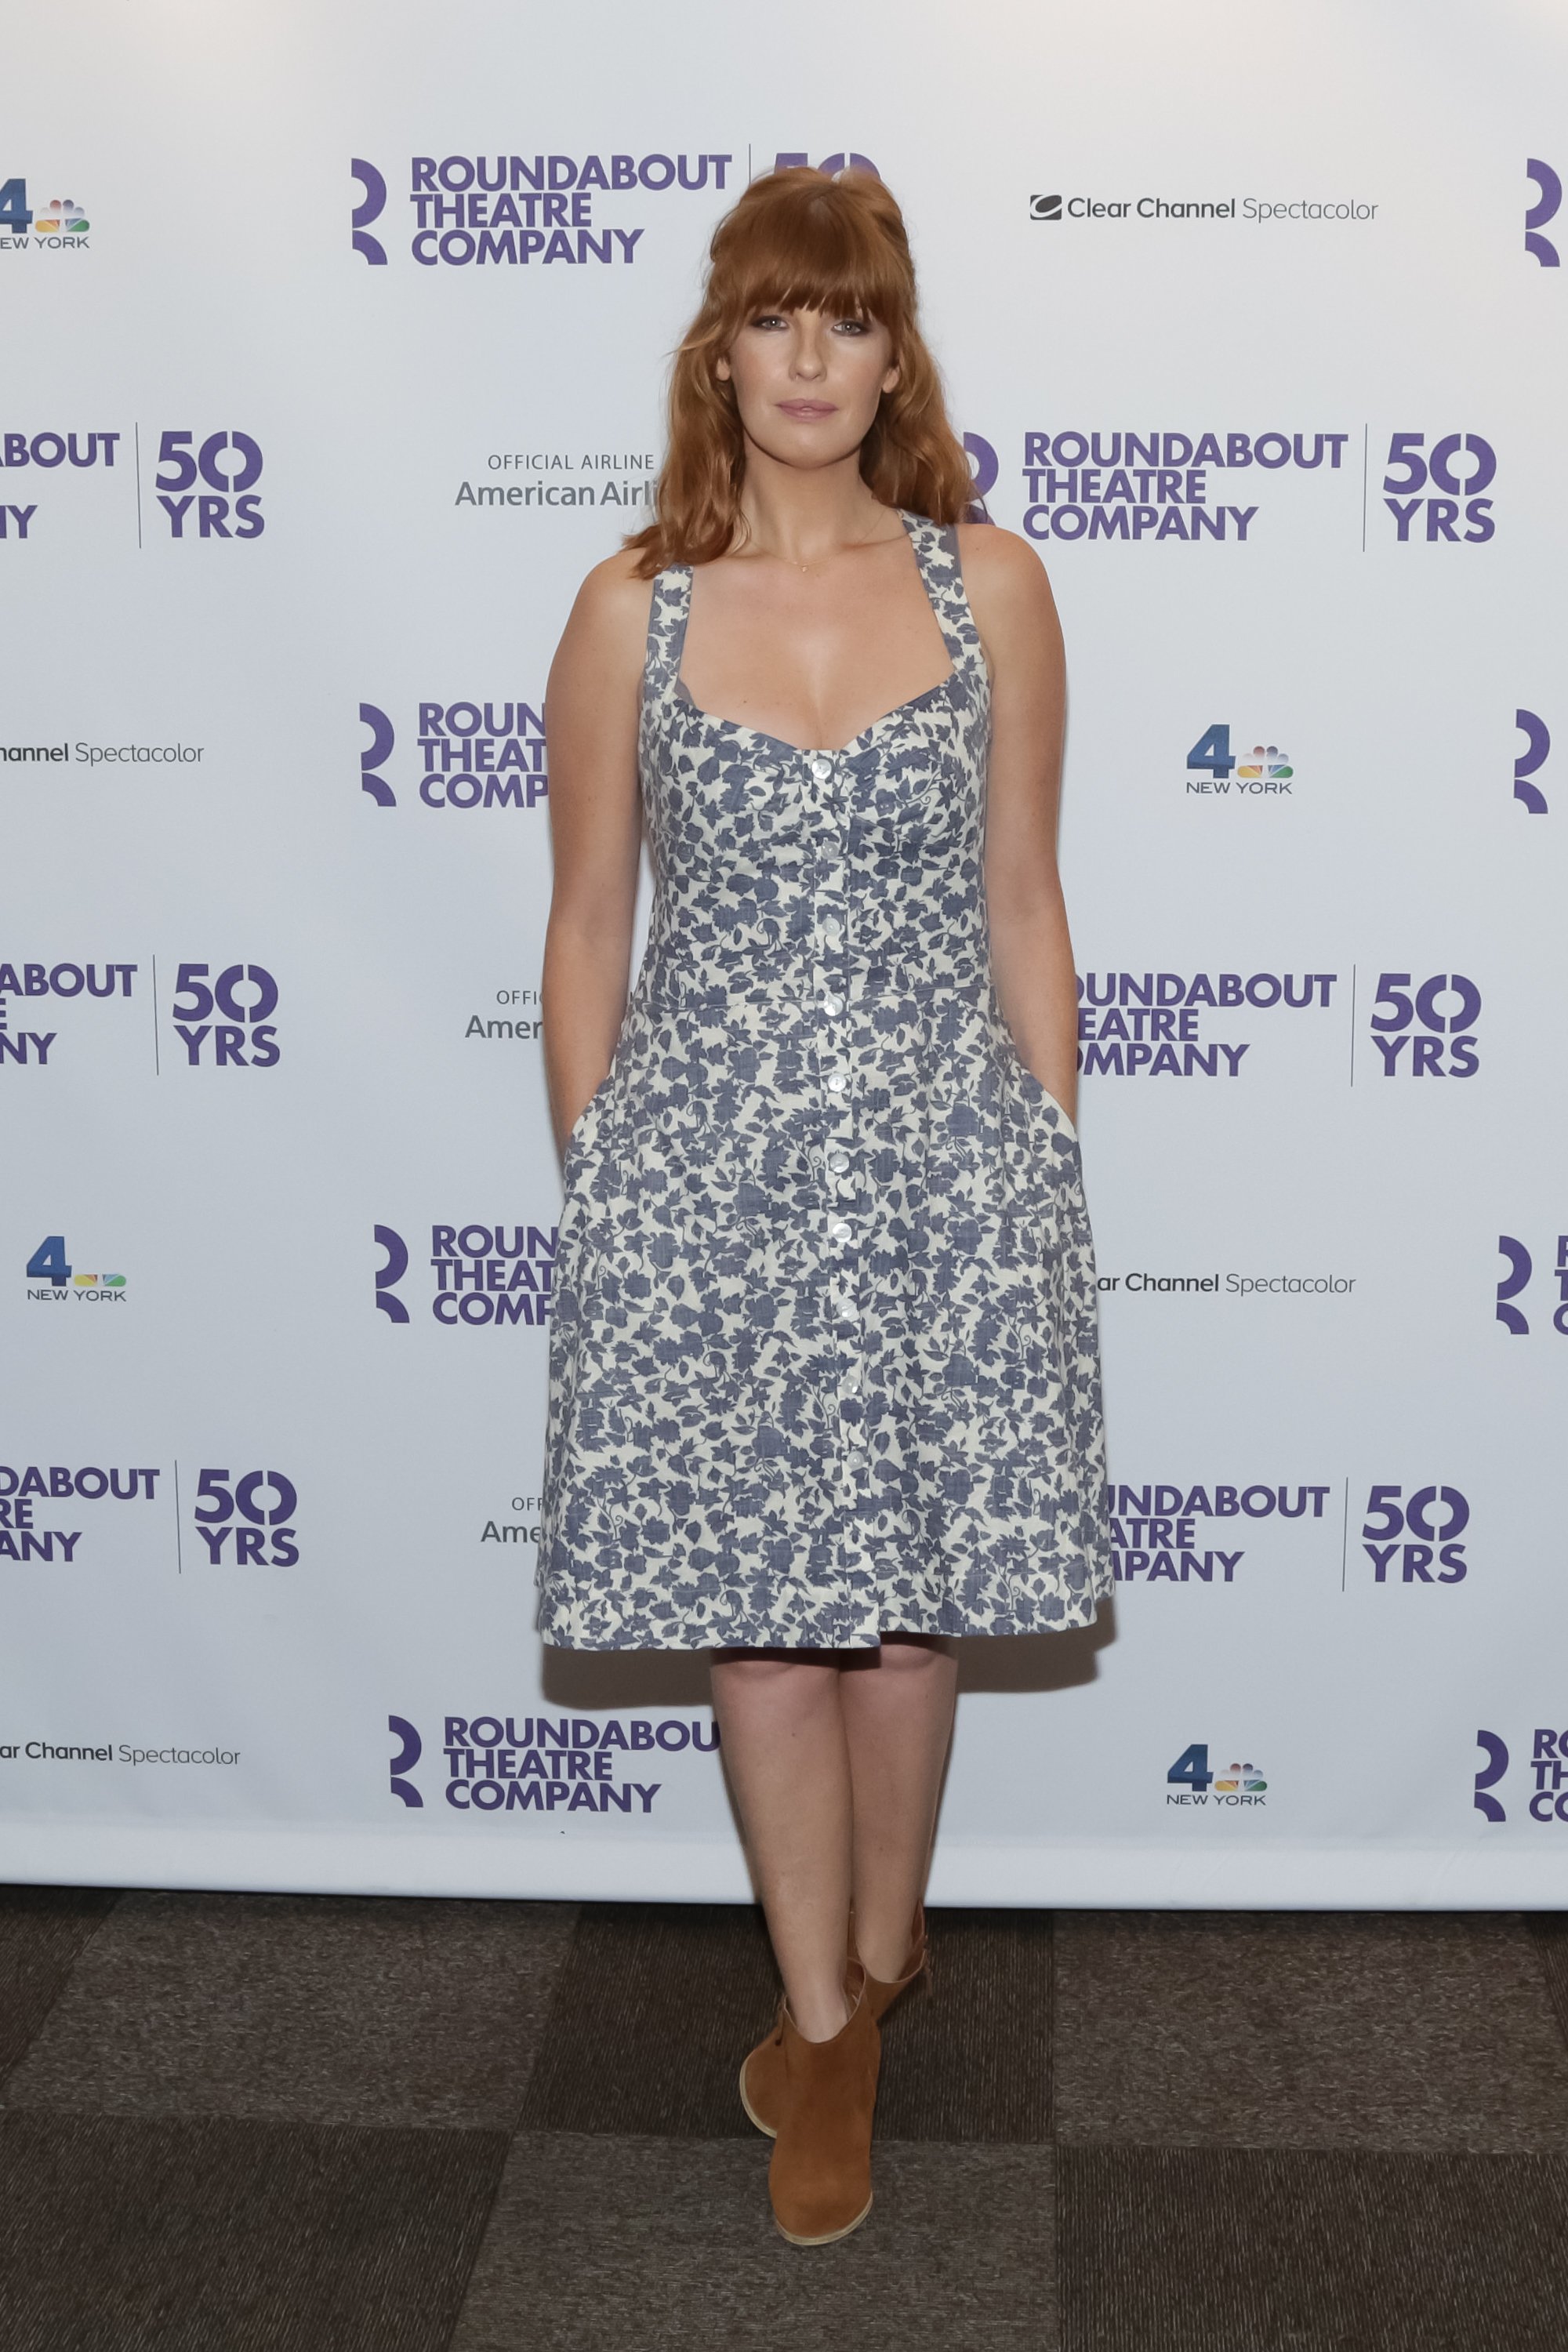 Kelly Reilly, who stars as Beth Dutton on hit-series "Yellowstone," arrives at Roundabout's 50th anniversary season party on September 10, 2015 in New York City.  | Photo: Getty Images